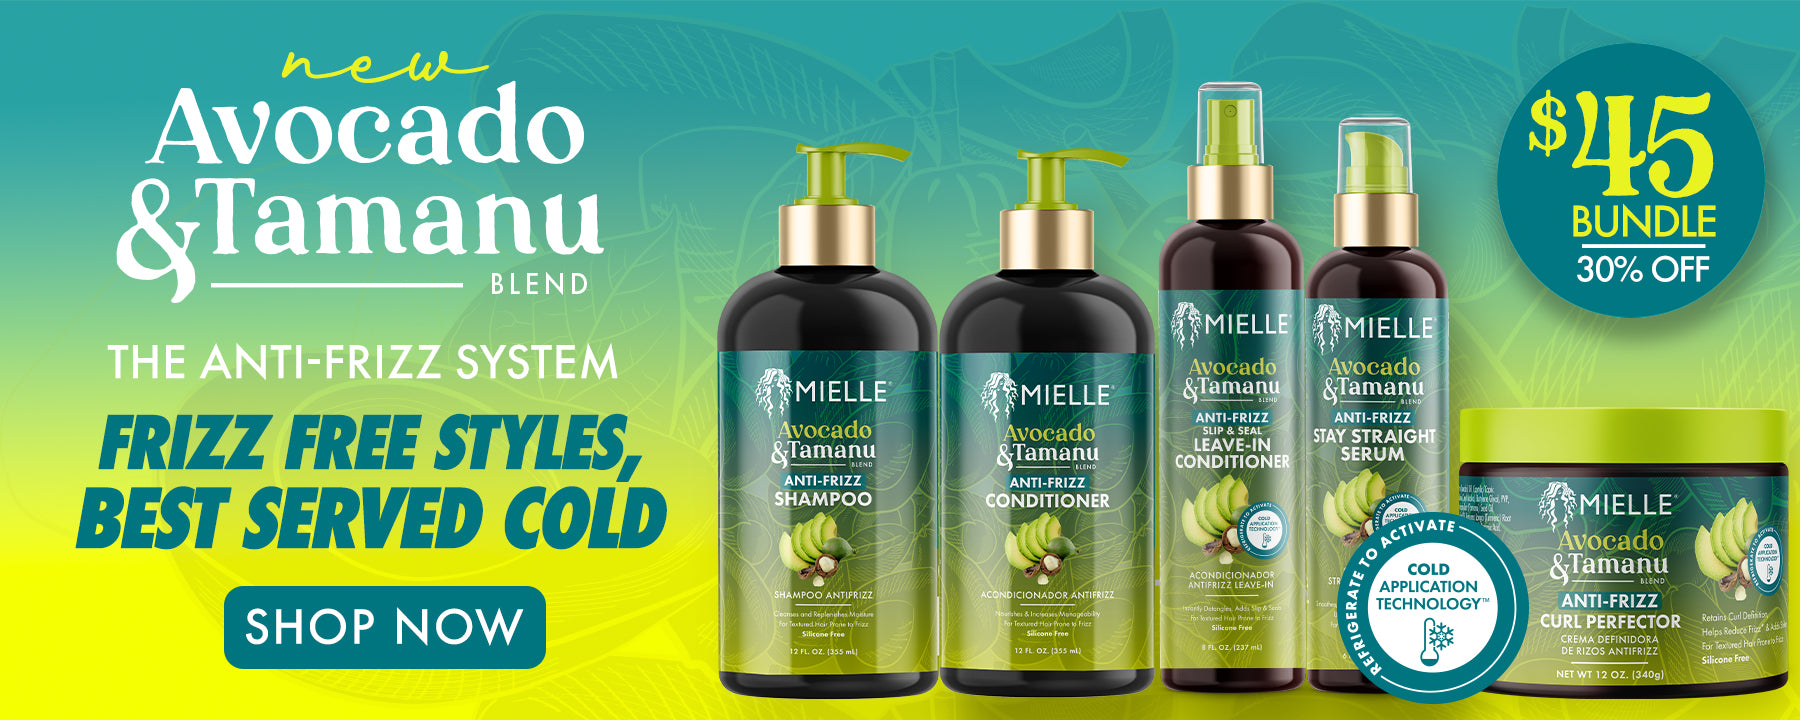 Avocado and Tamanu based all hair products to control anti frizz and gives best result when applied cold.